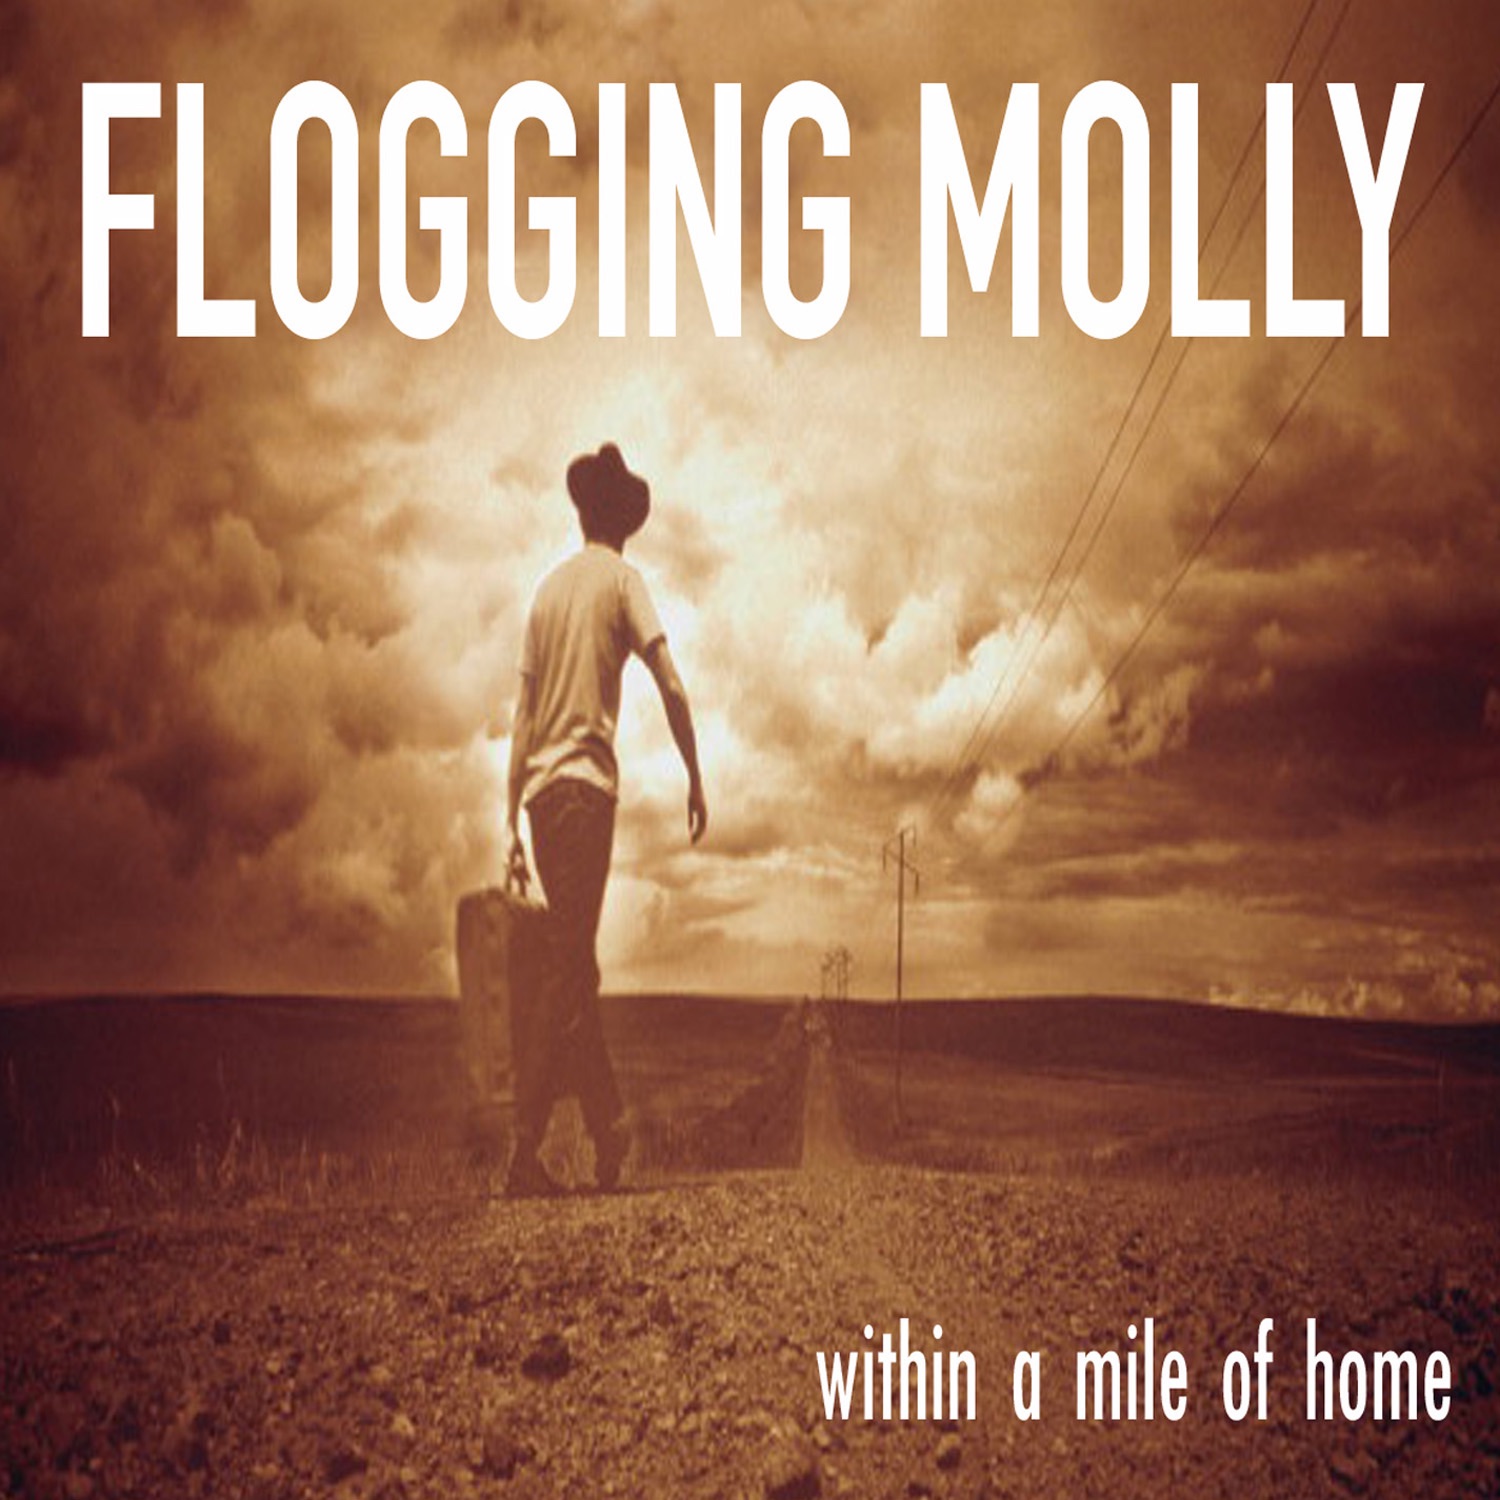 Art for Seven Deadly Sins by Flogging Molly